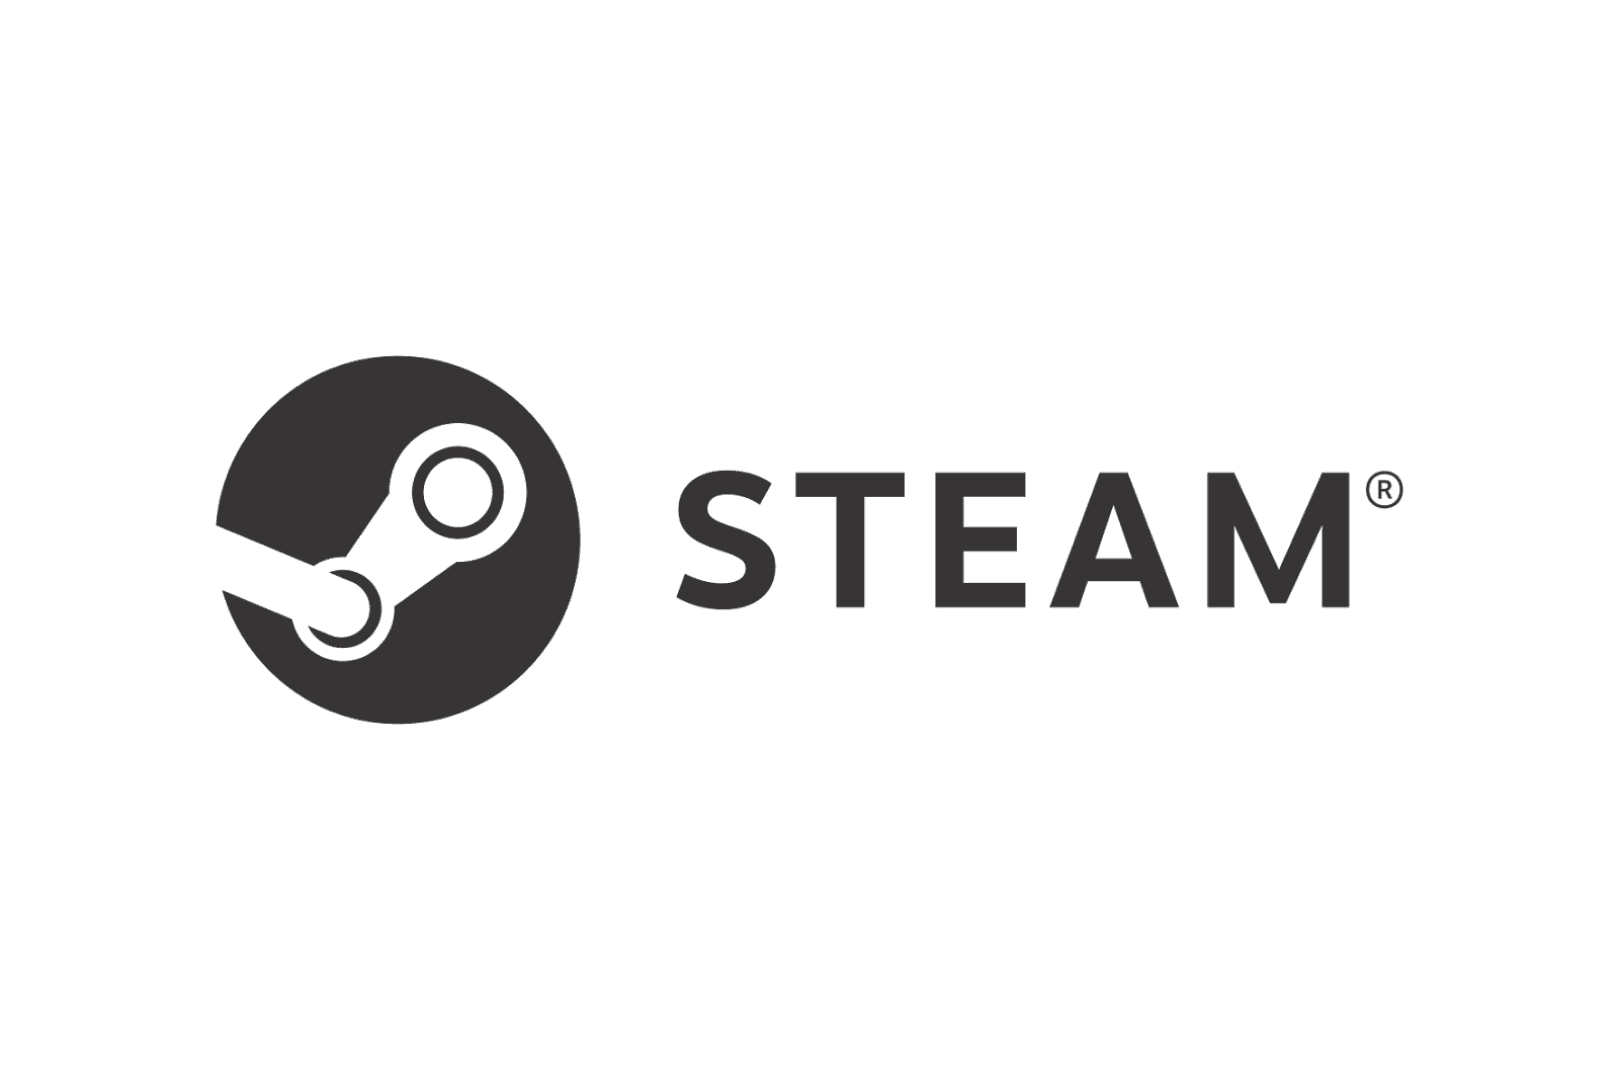 Steam Changes Review Scores, Disregards Non-Steam Purchases